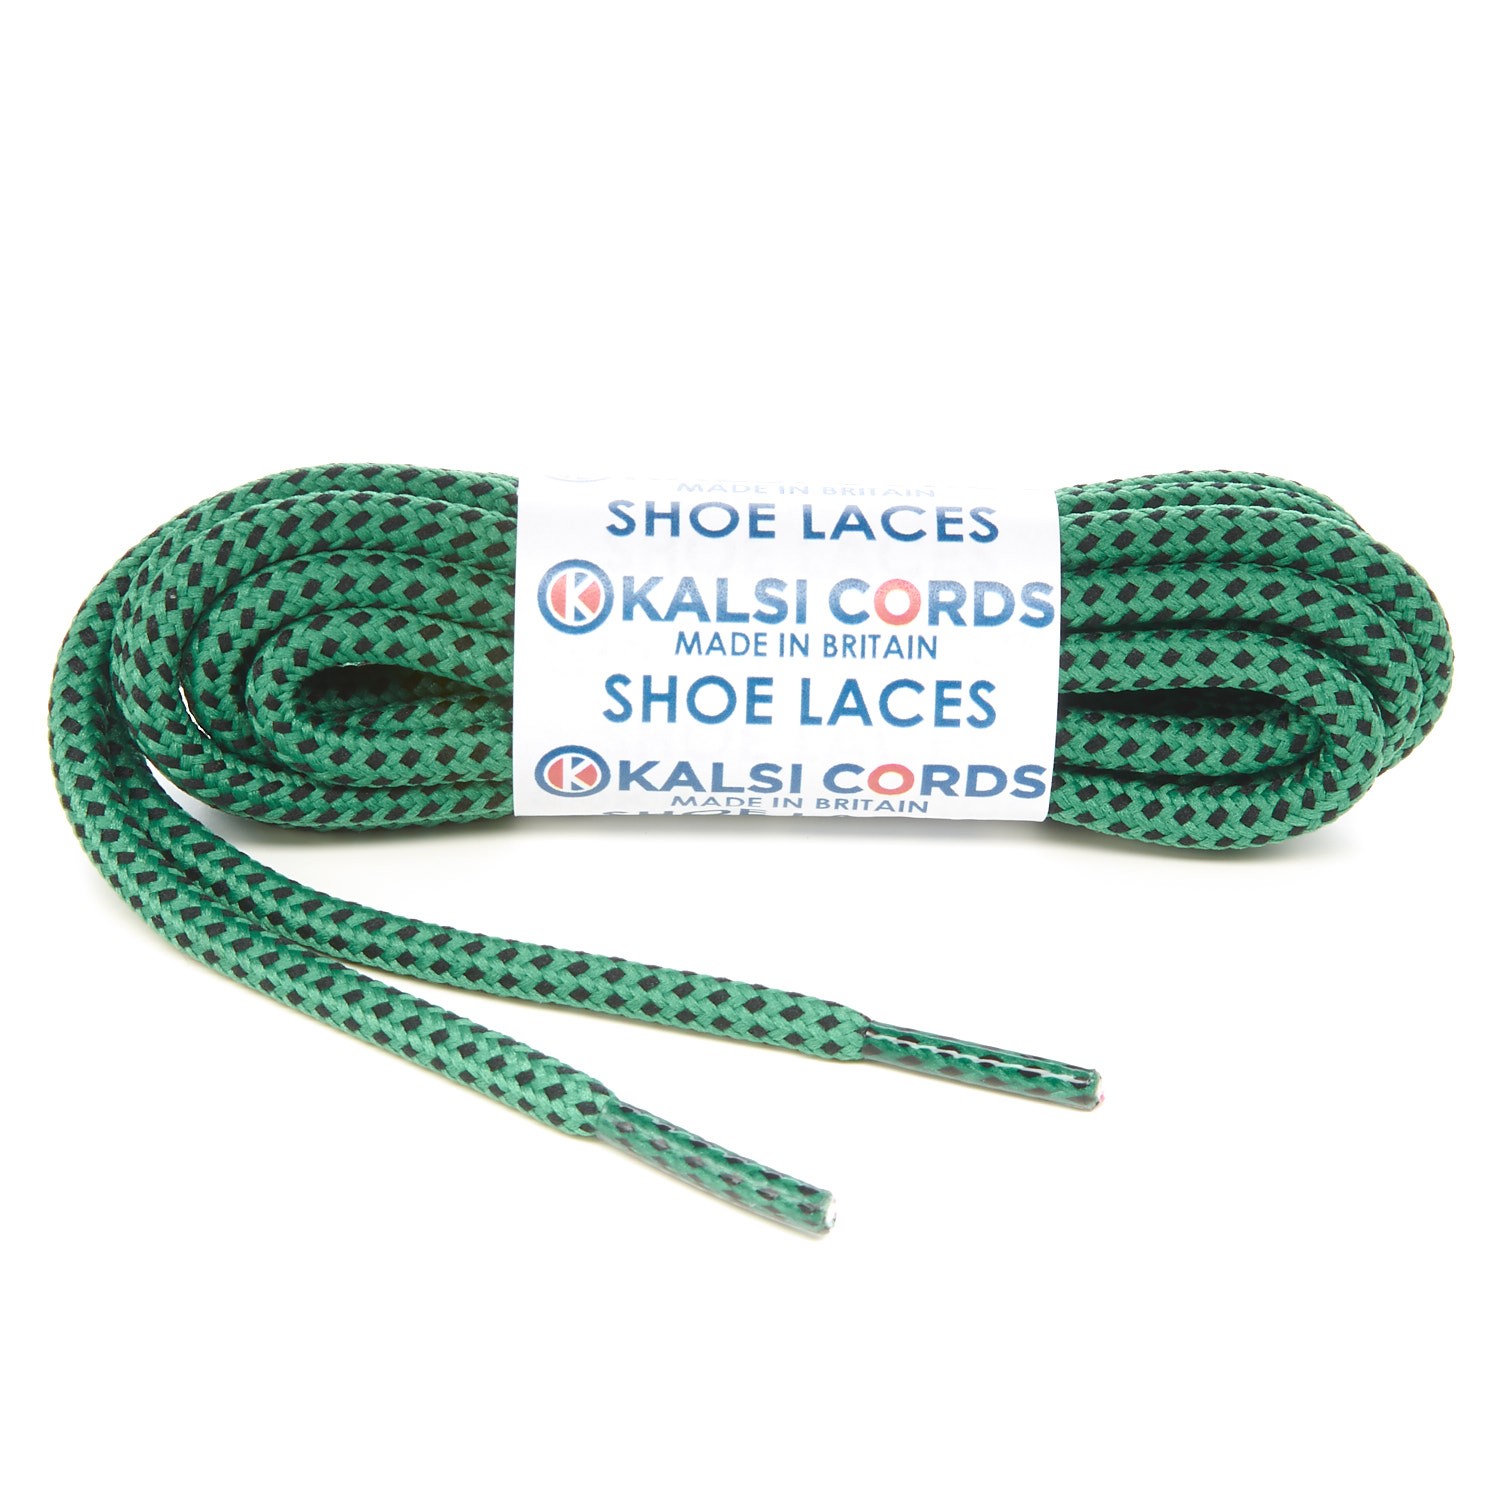 Fleck Emerald Green with Black Shoe Laces 1 Kalsi Cords